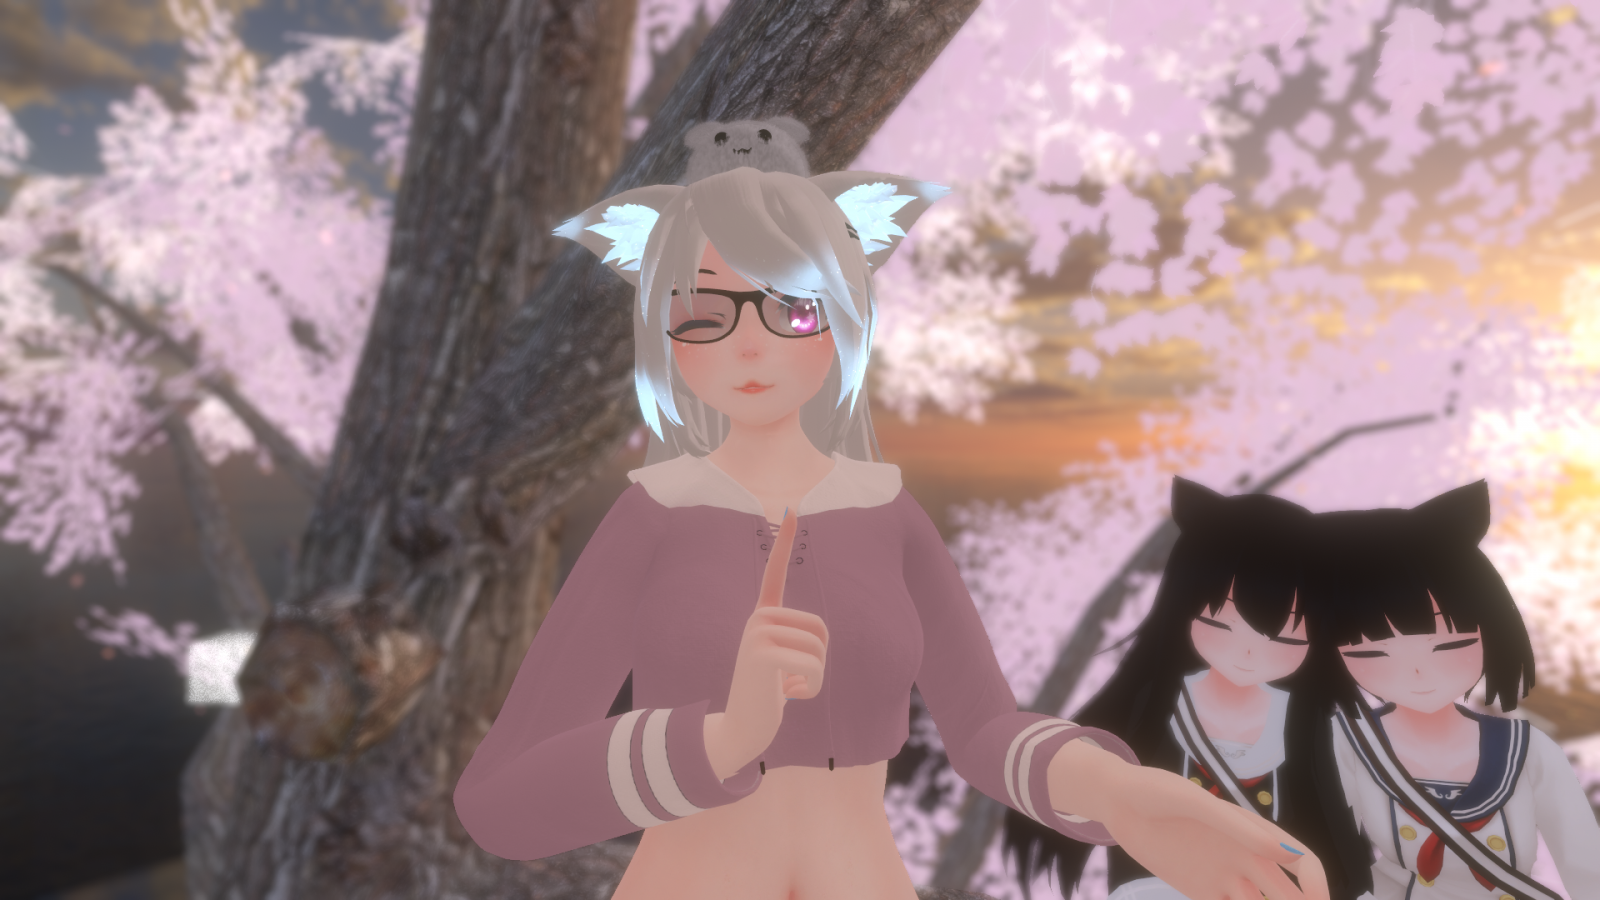 VRChat_1920x1080_2020-11-23_21-41-28.902.png